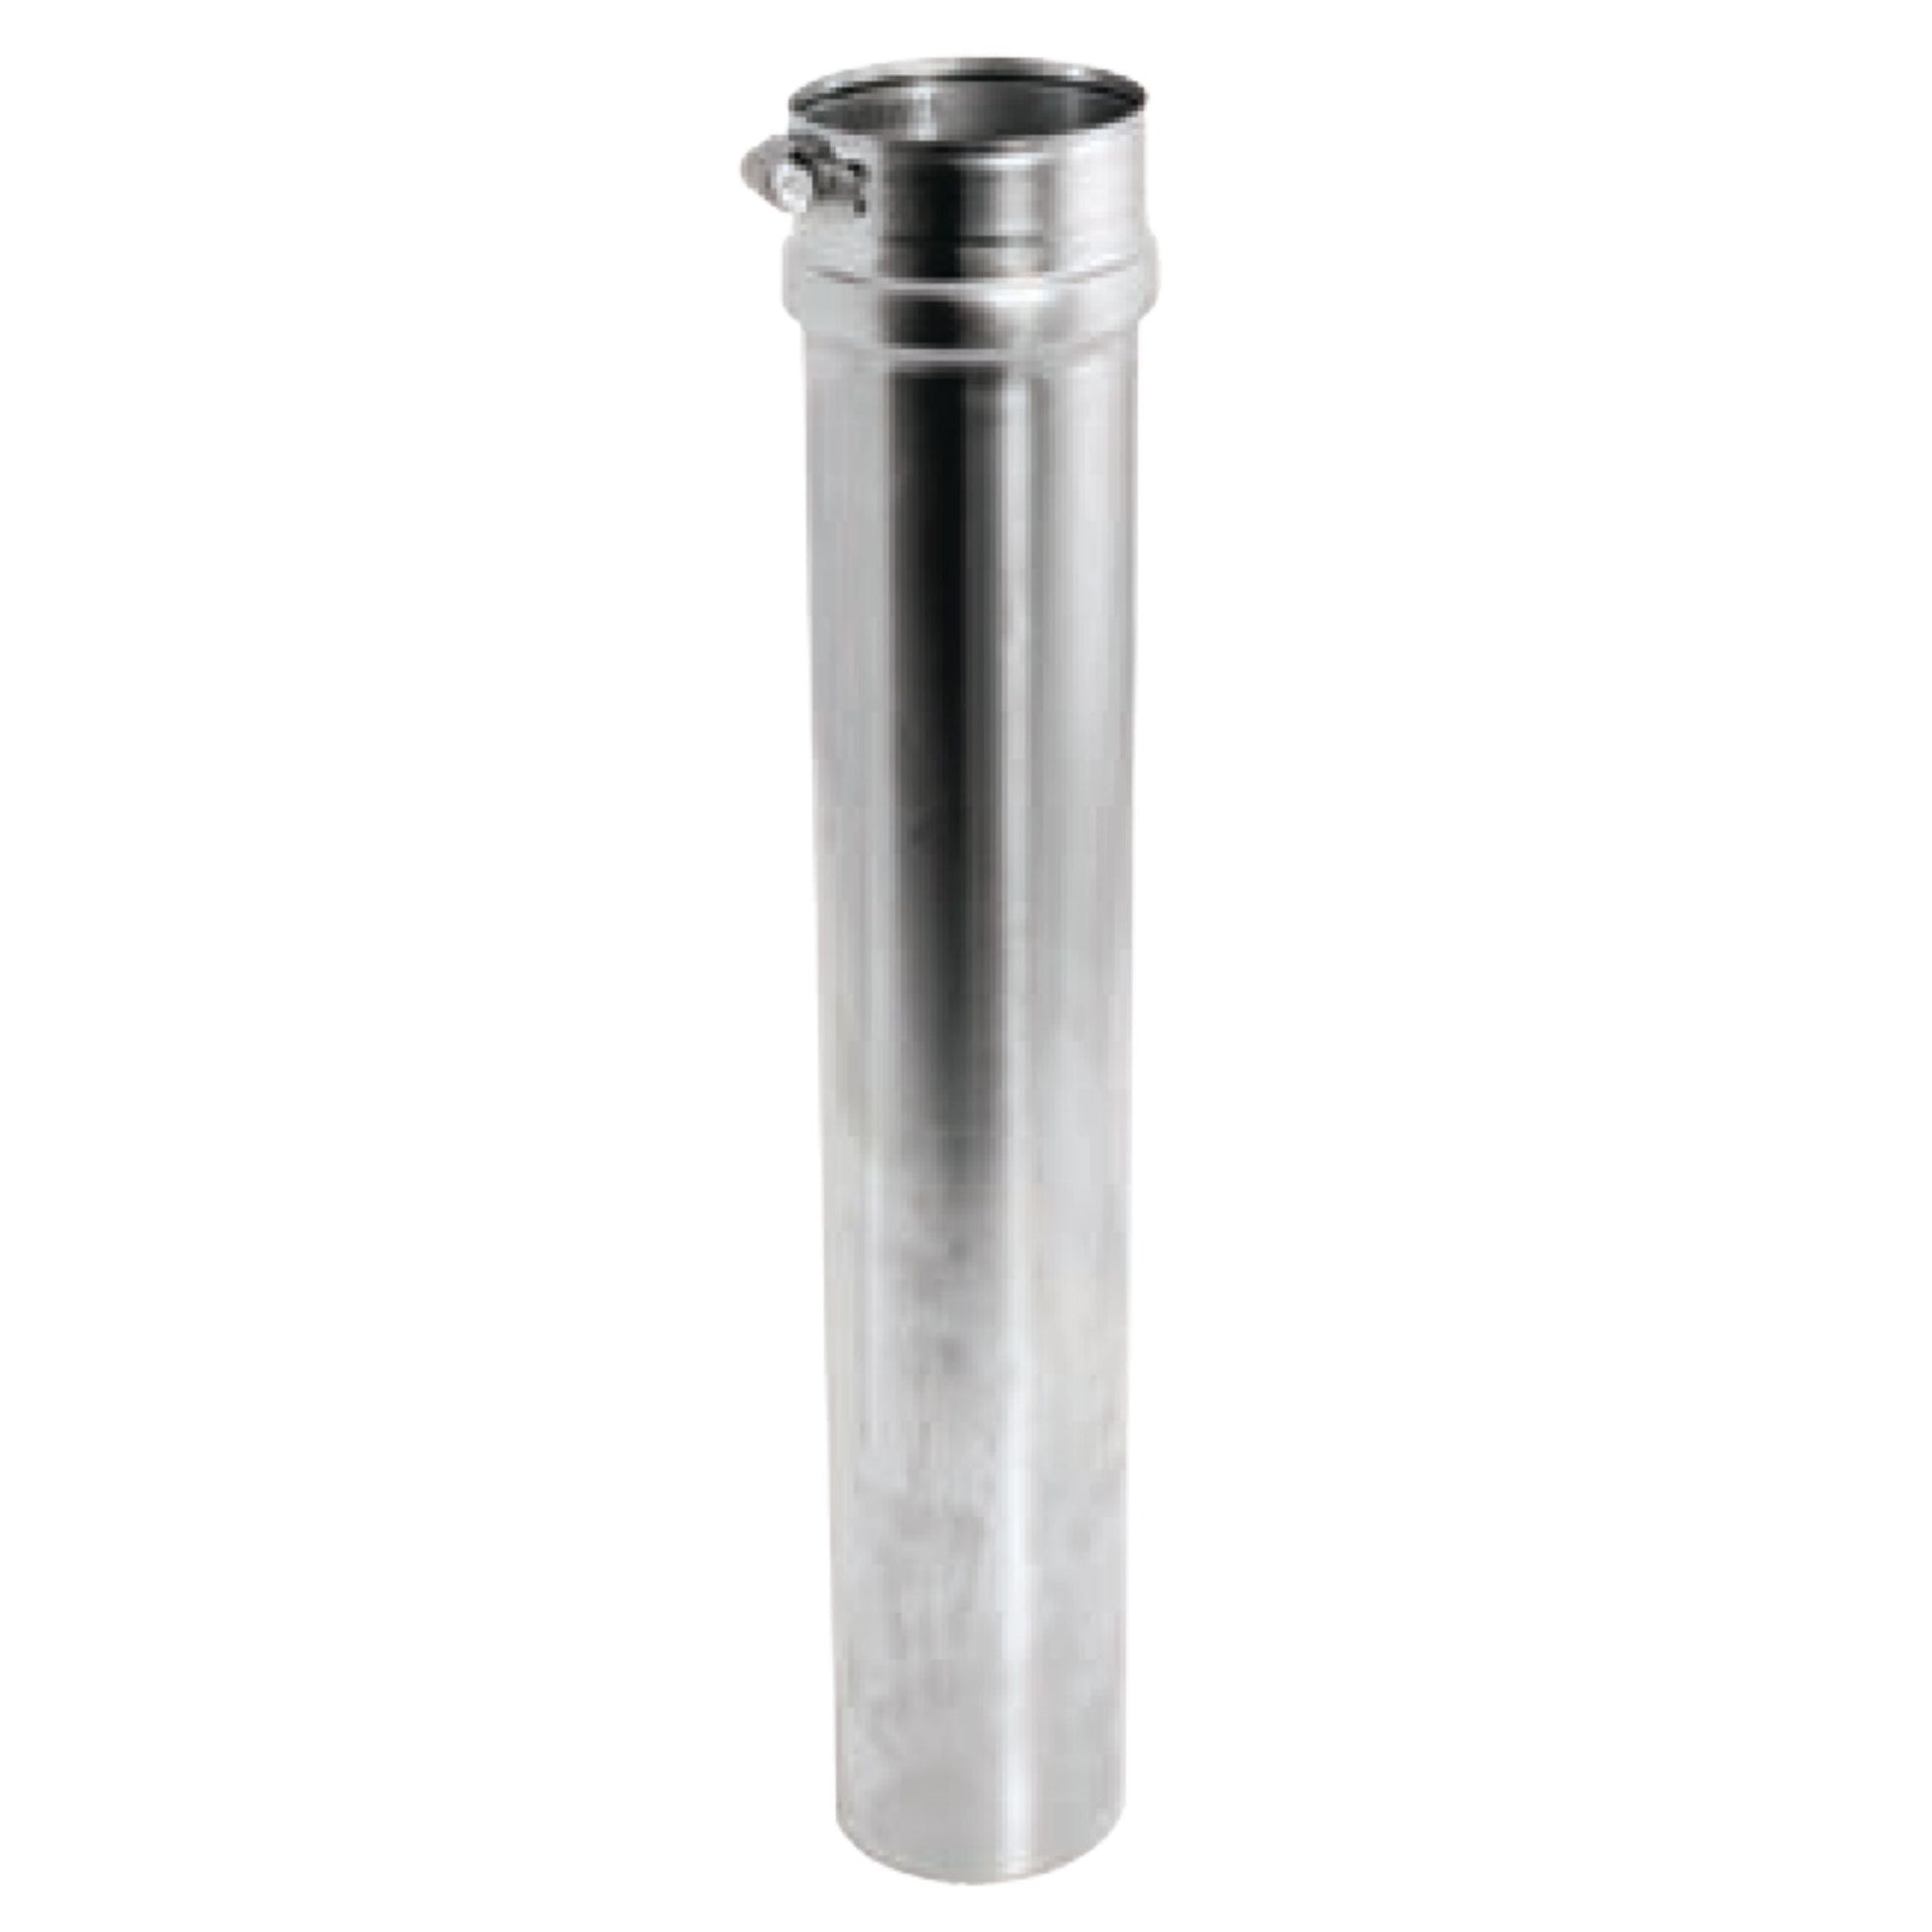 DuraVent FasNSeal 8" x 18" 316L Stainless Steel Adjustable Vent Length